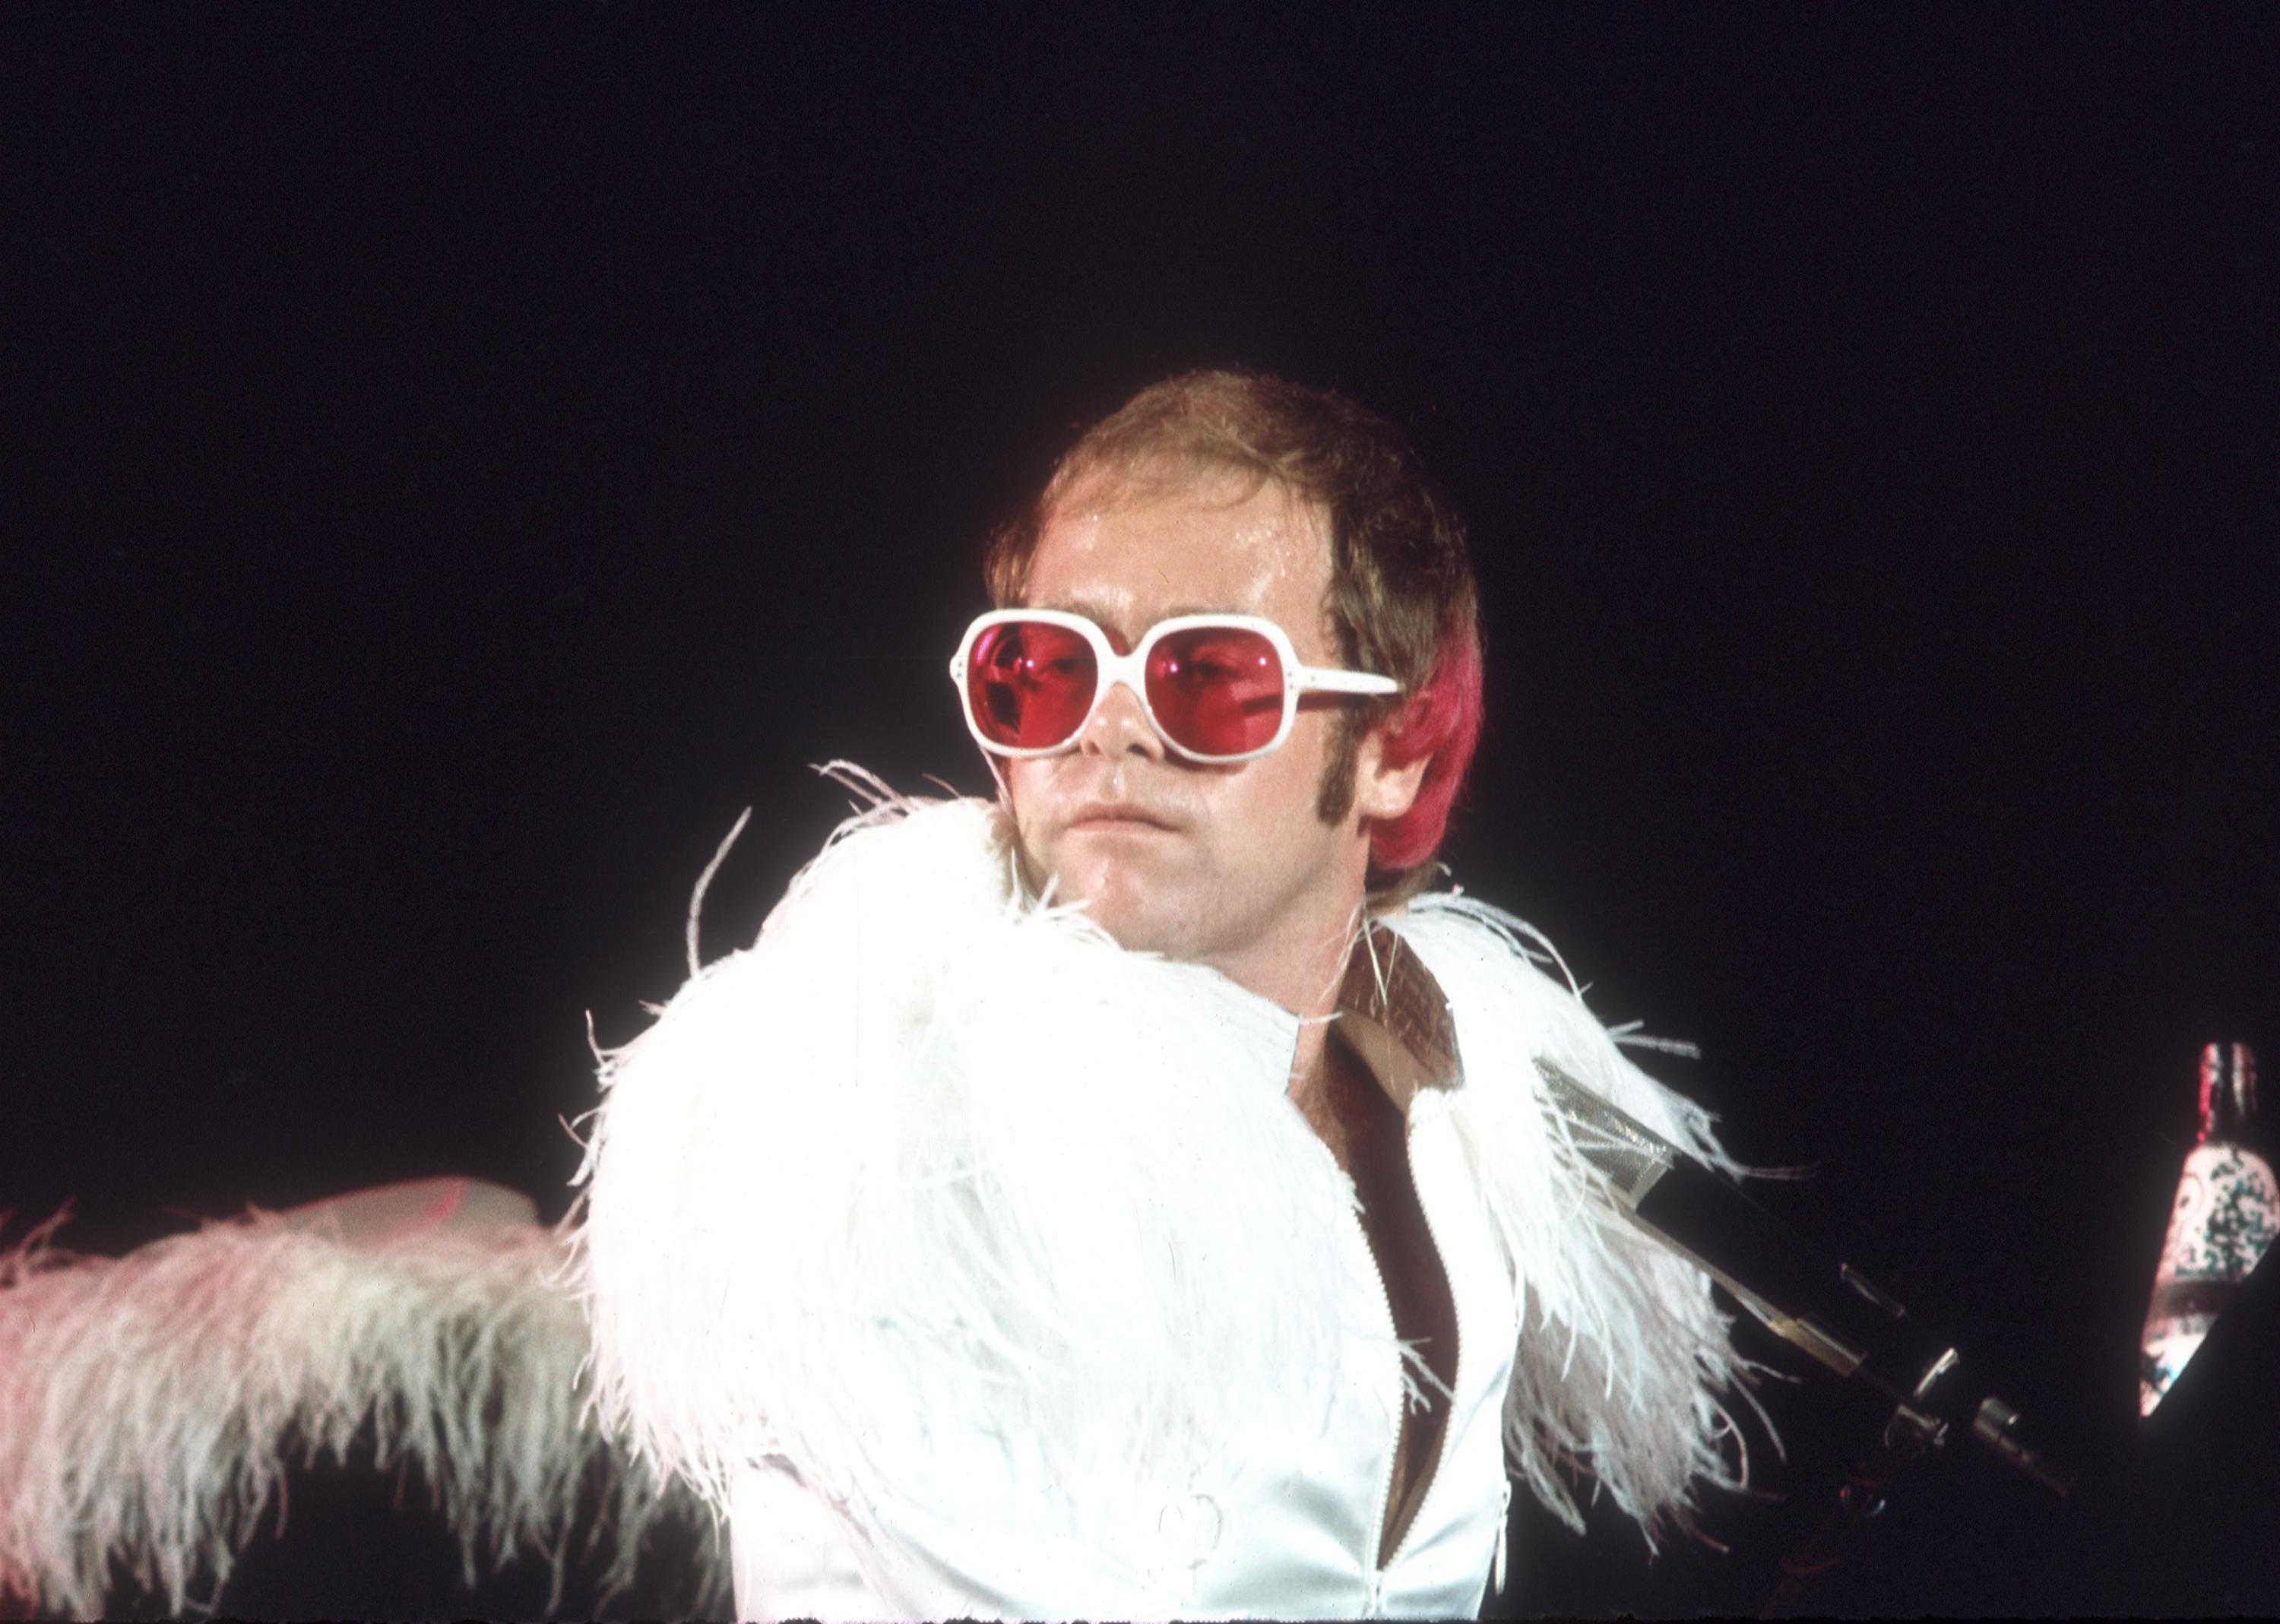 Elton John wears white and red sunglasses and a white feather coat.